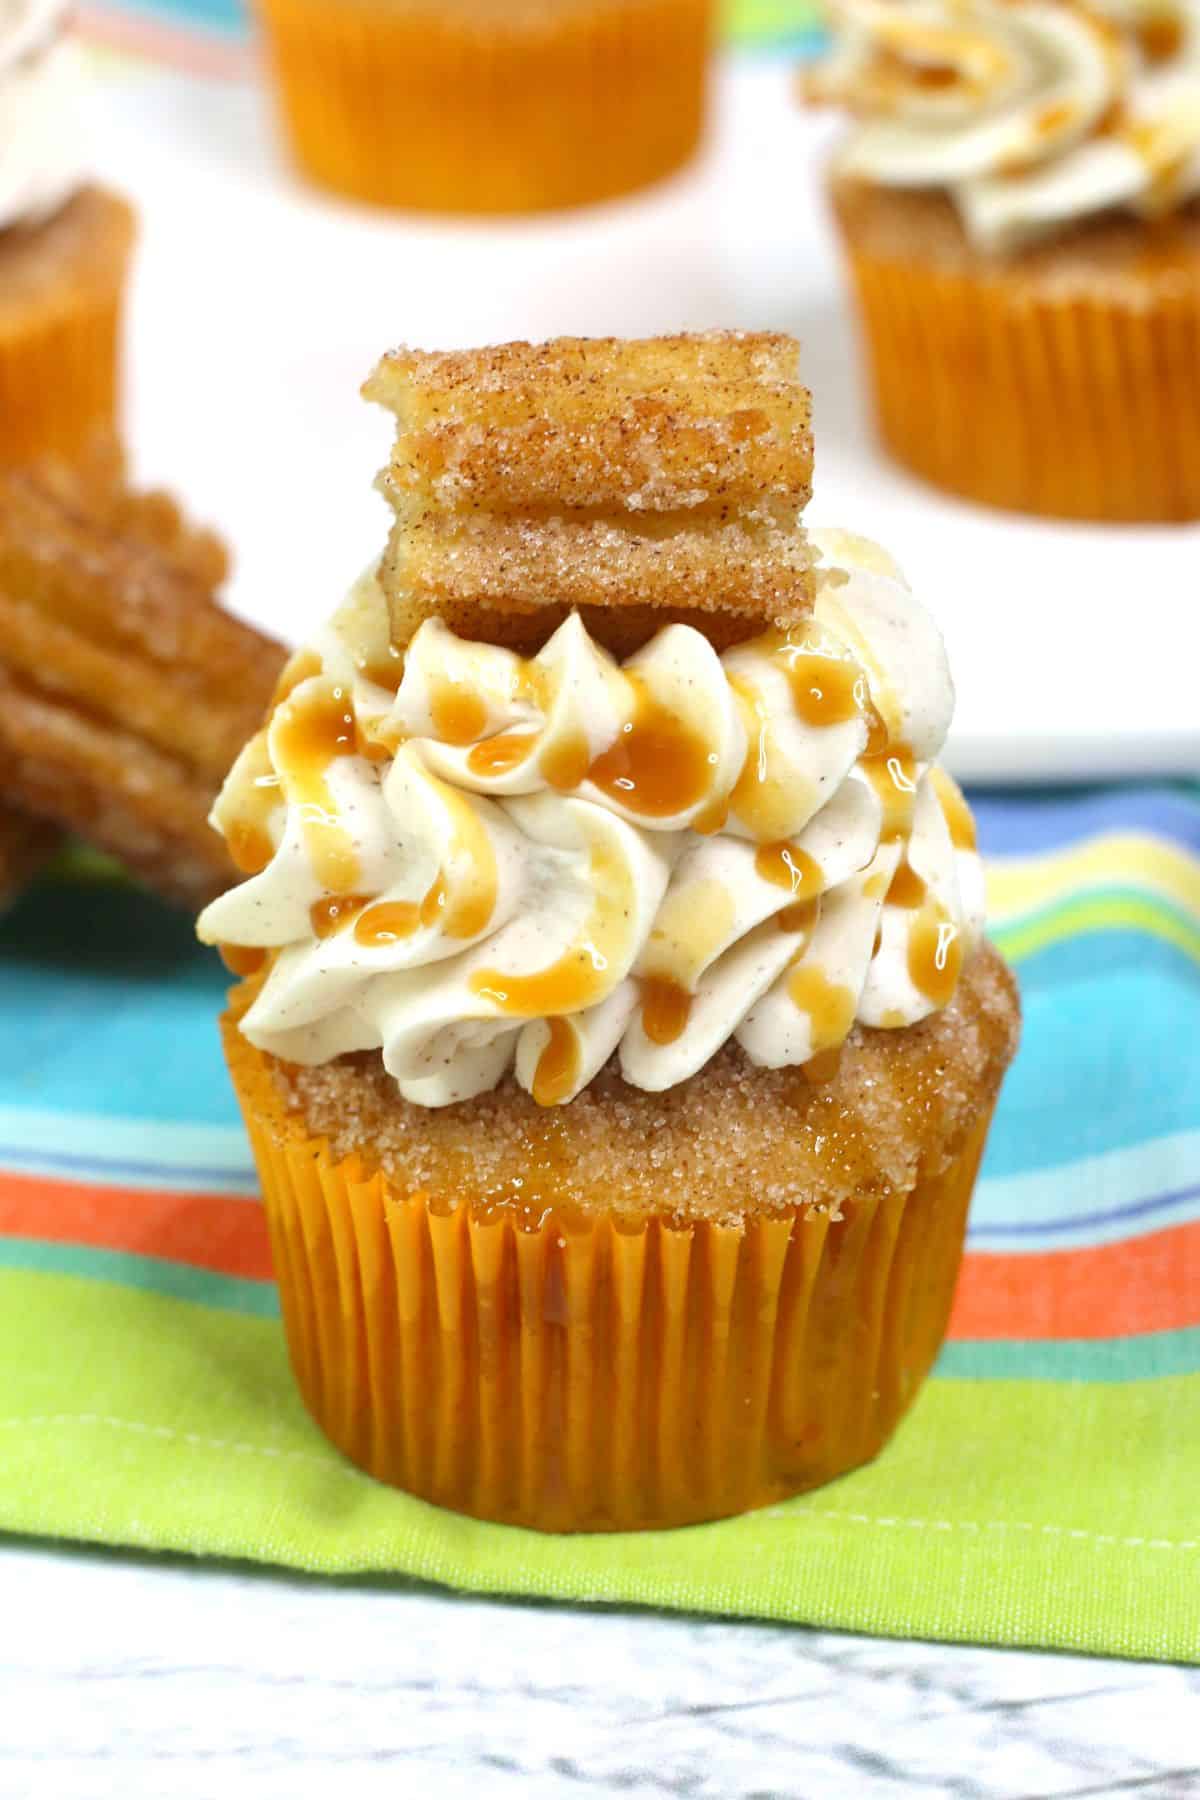 Cinnamon Cupcake on a colorful tablecloth, garnished with caramel sauce and a piece of churro.